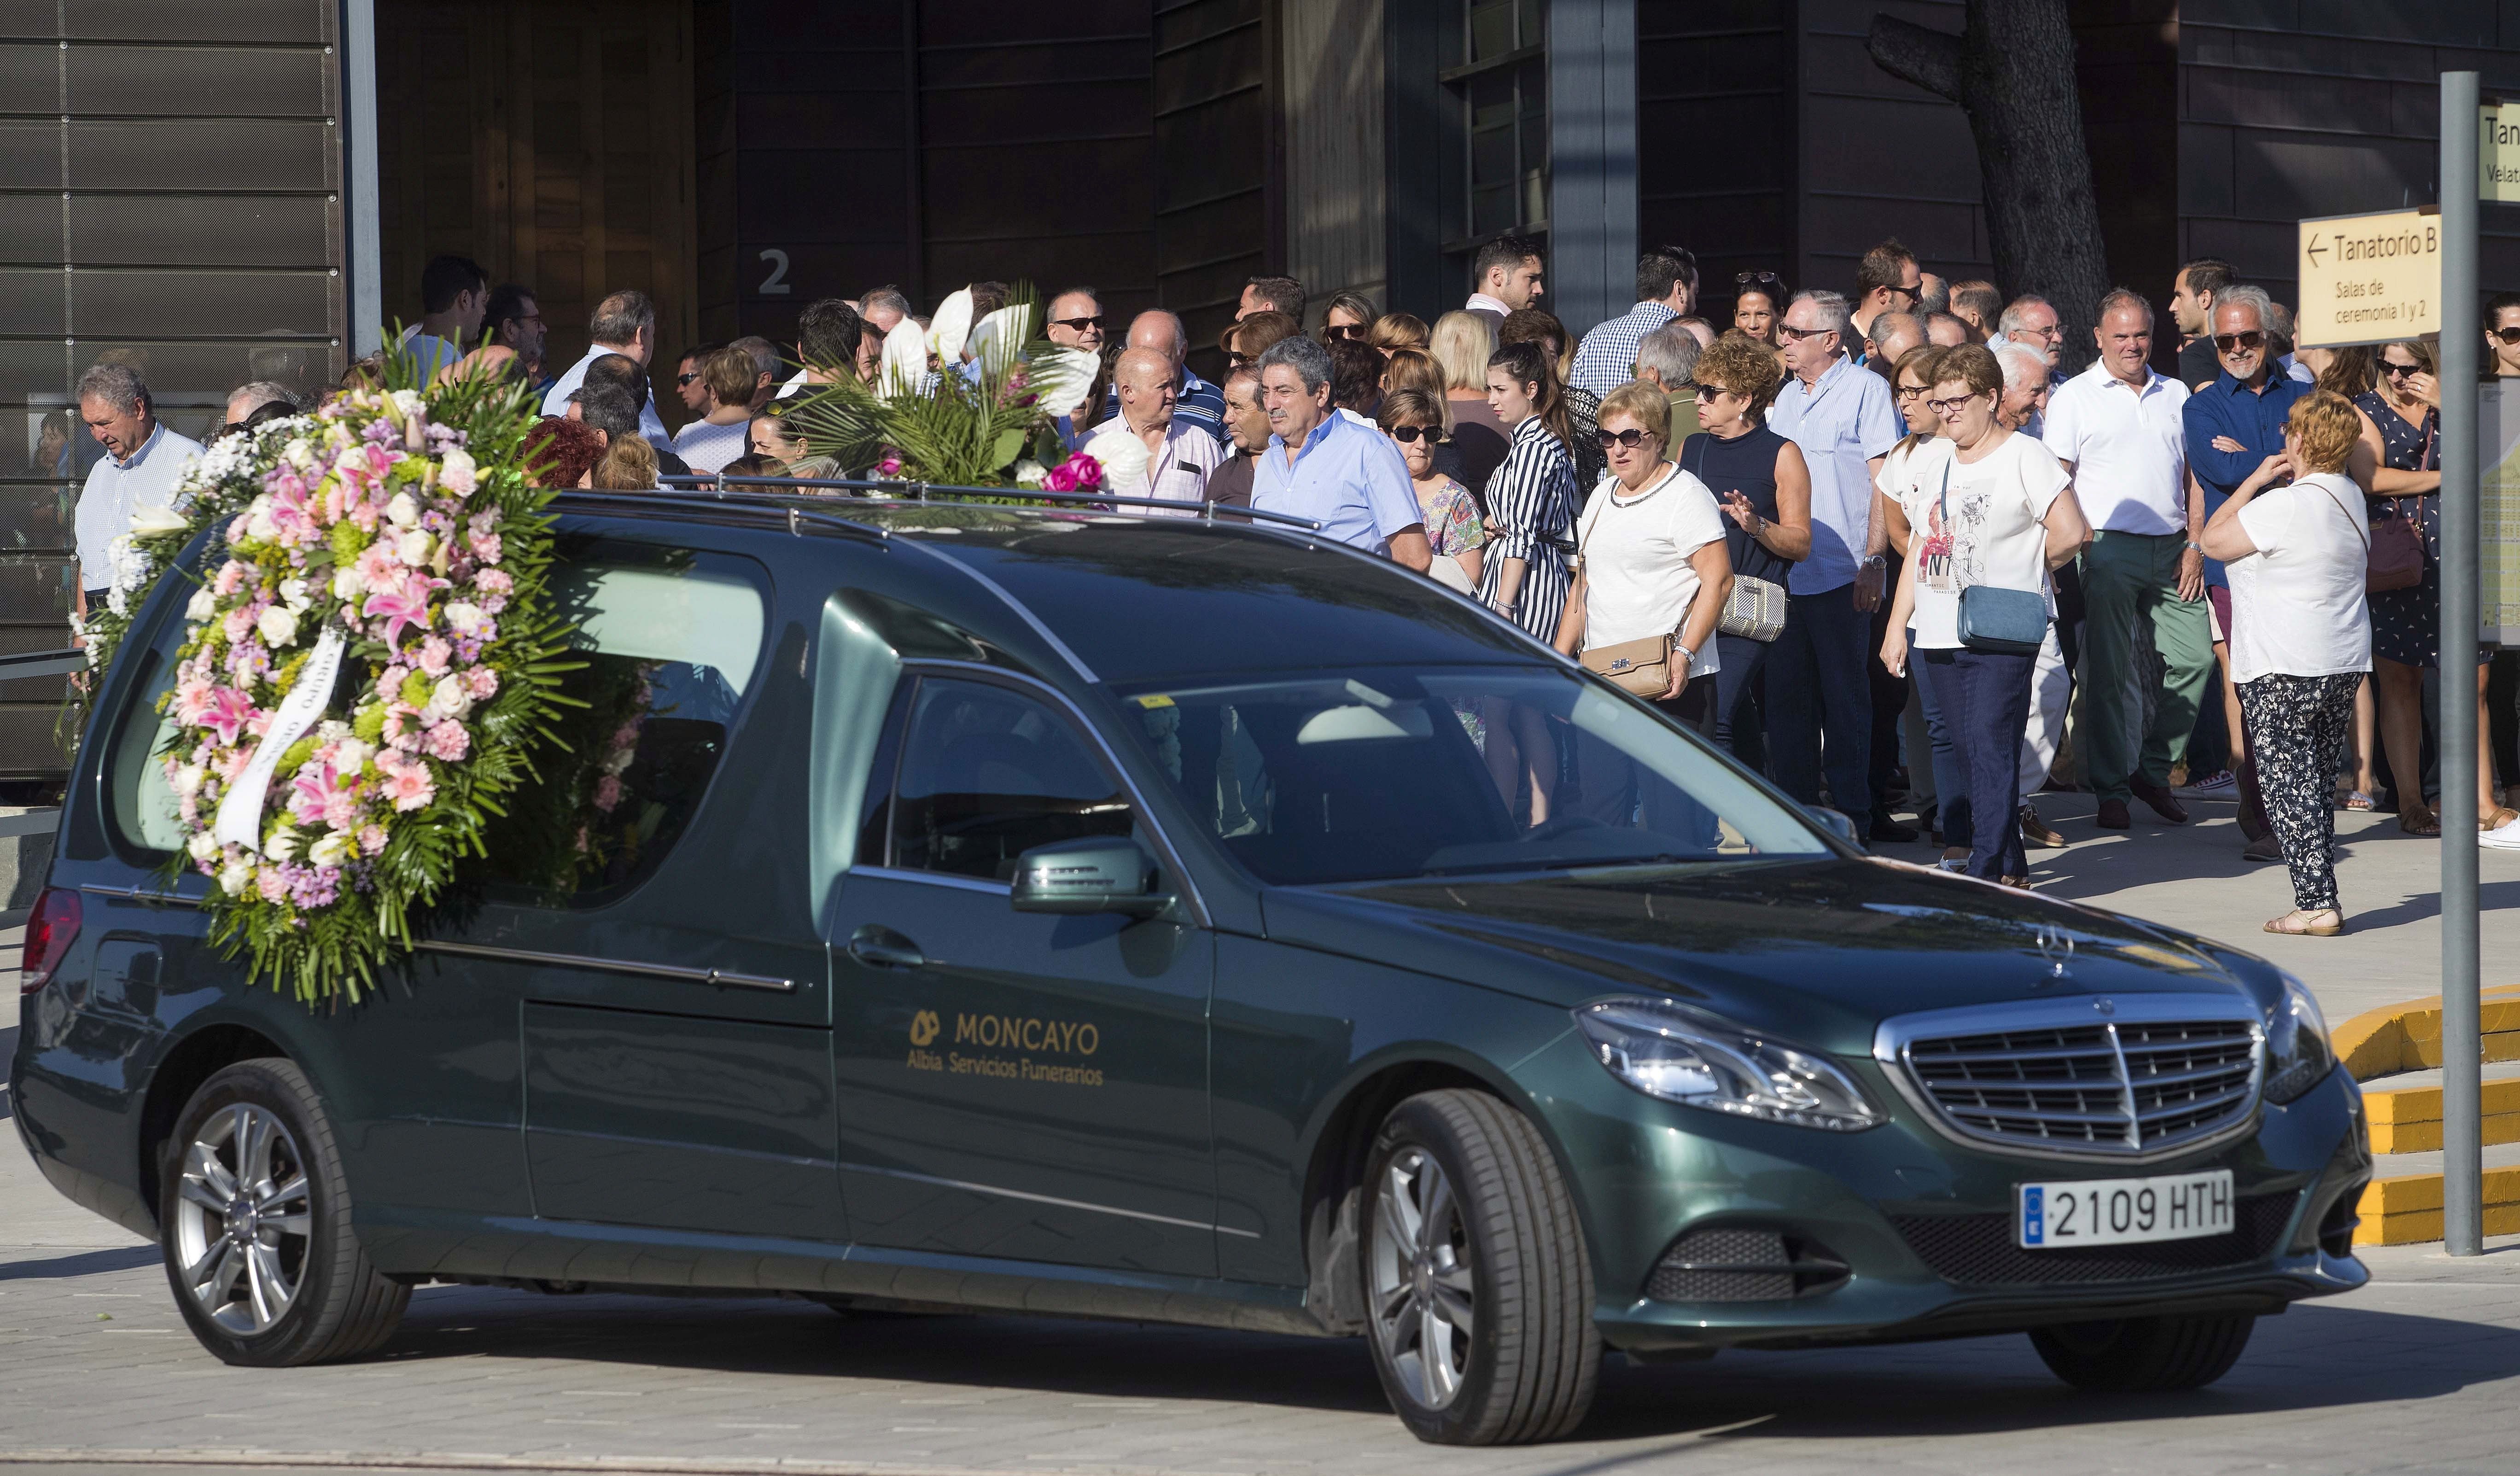 epa06155871 Relatives and friends of 65-year-old Ana Maria Suarez, 67, arrive to her funeral in Zaragoza, Spain, 22 August 2017. Ana Maria, one of the 15 victims of the terrorists attacks in Catalonia, died when she was run over by a vehicle driven by terrorists while she was walking along the promenade in Cambrils with her husband and sister who were also seriously injured. At least 15 people were killed and some 130 others injured after cars crashed into pedestrians on the La Rambla boulevard in Barcelona and on a promenade in the coastal city of Cambrils on 17 August. The so-called 'Islamic State' (IS) claimed responsibility for the attacks in Barcelona and Cambrils.  EPA/TONI GALAN